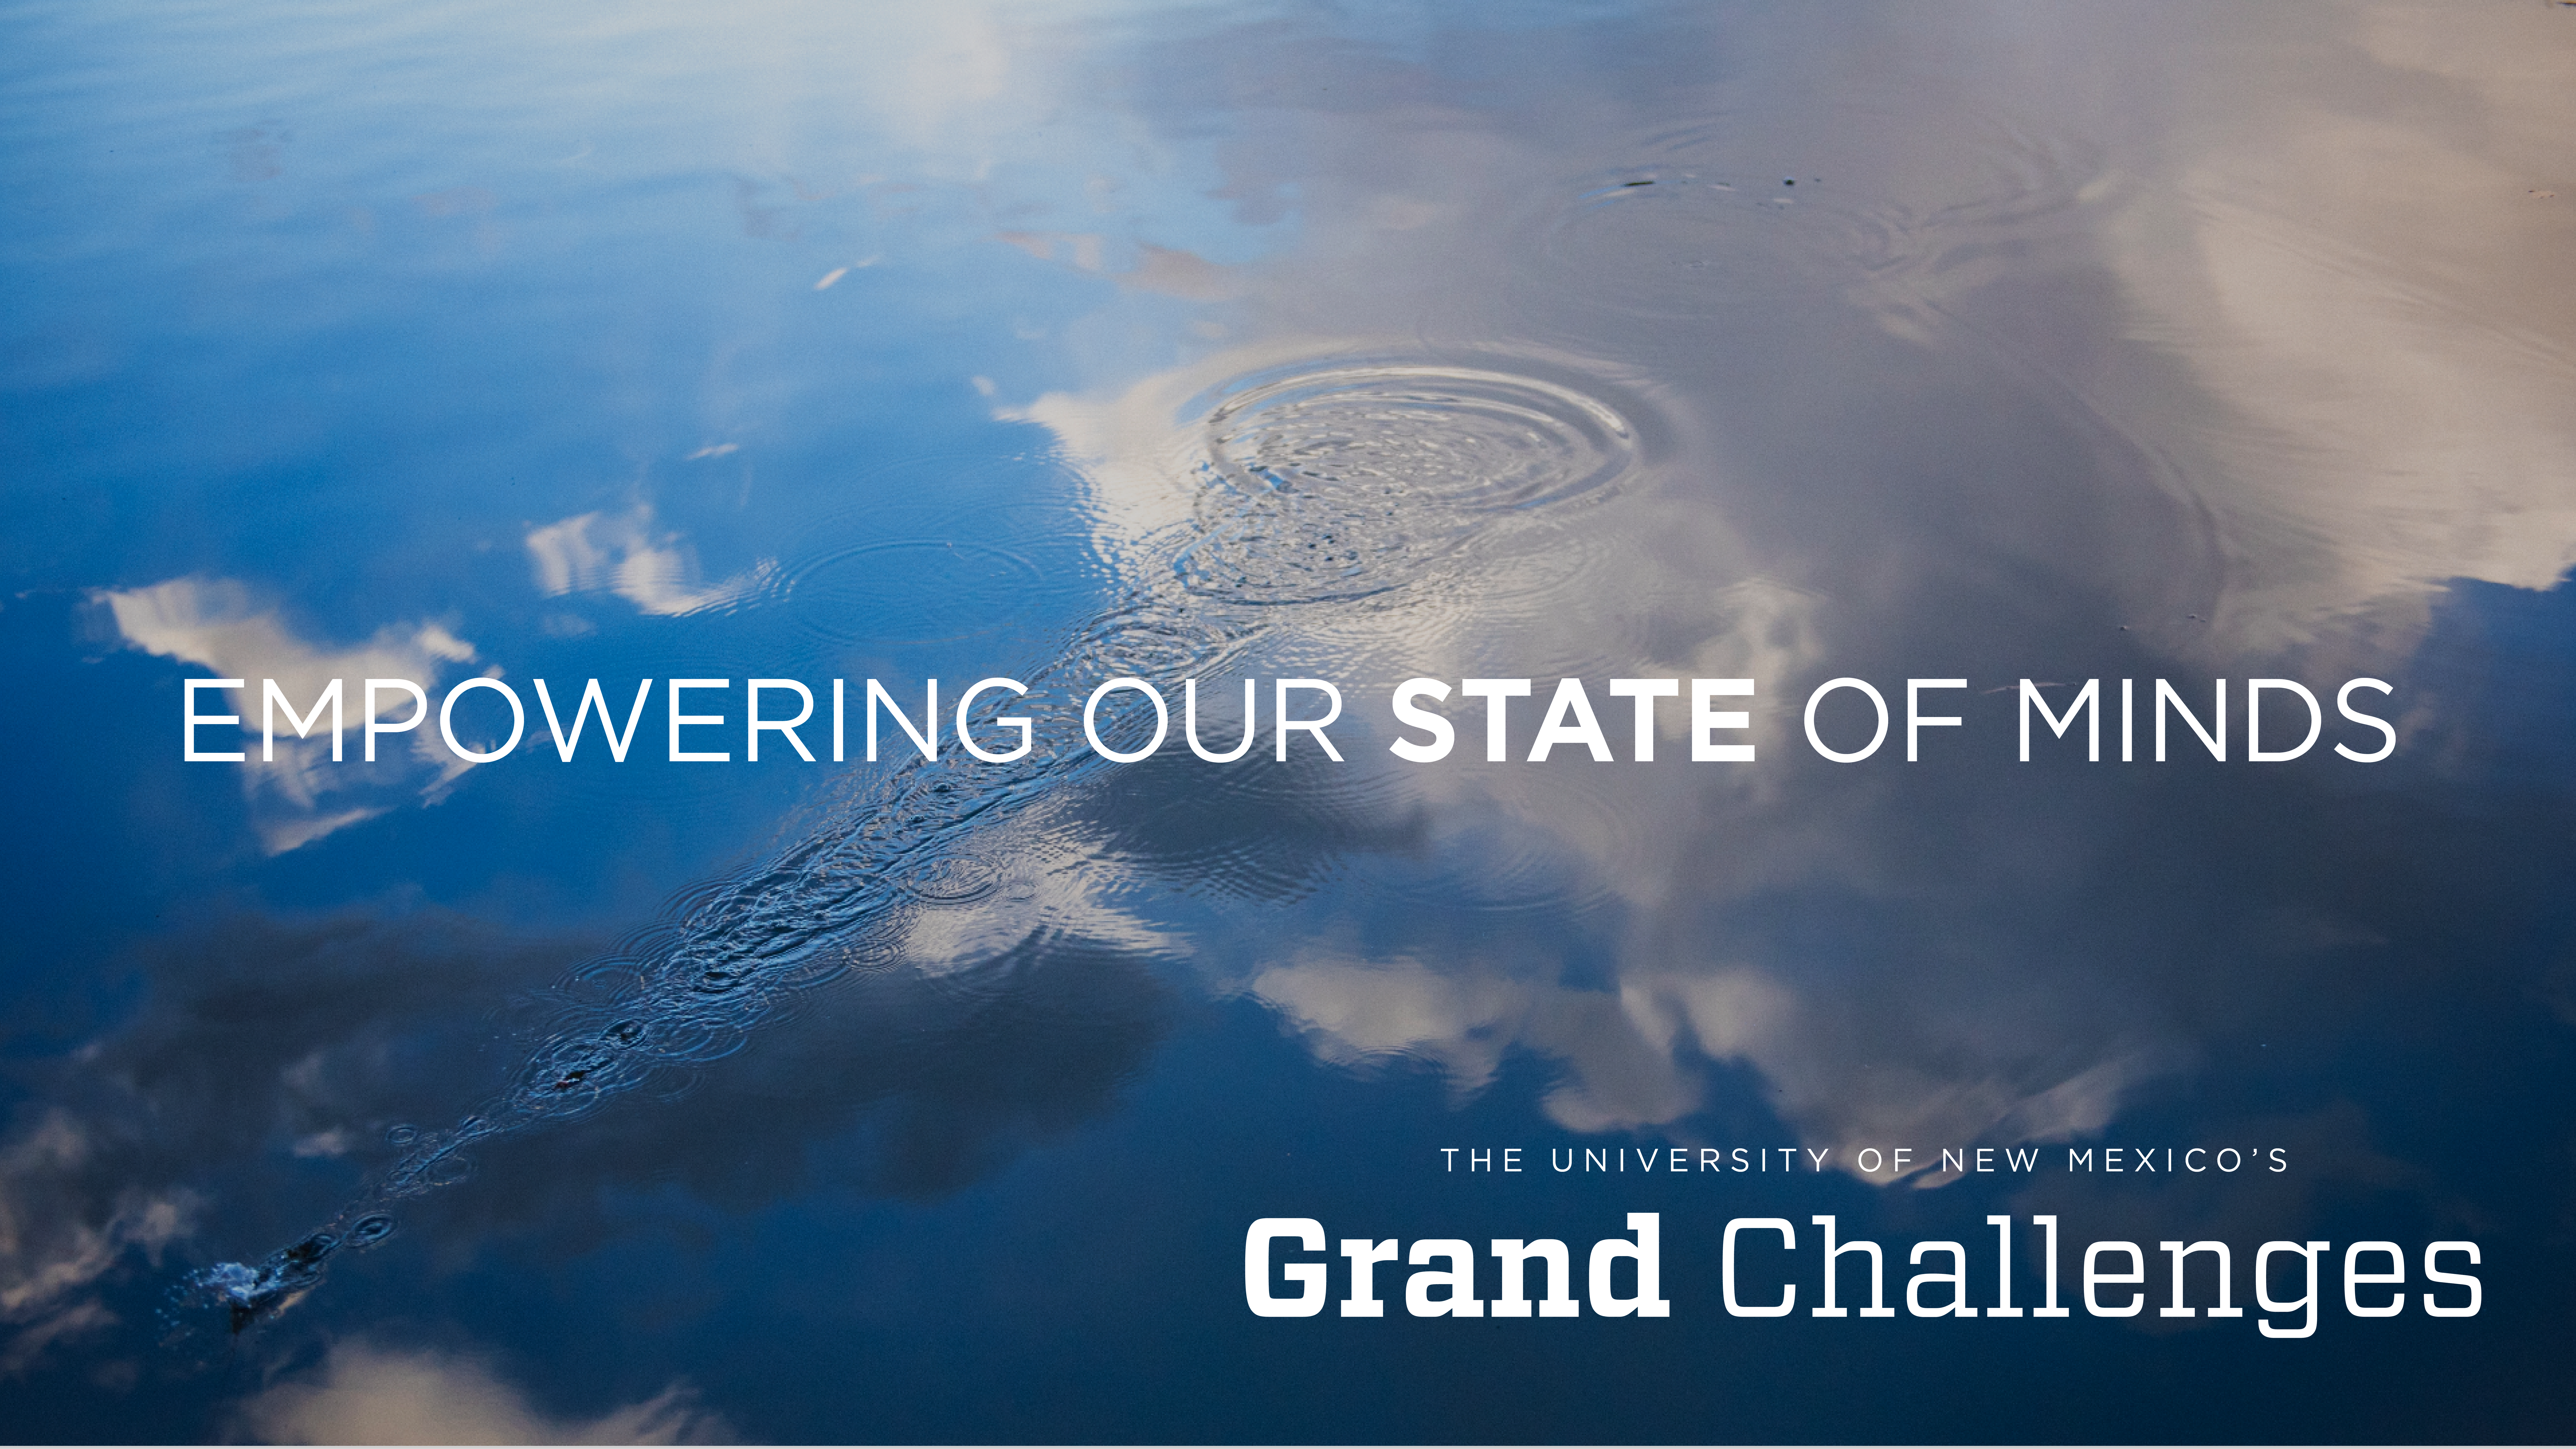 The University of New Mexico announces newest Level 2 Grand Challenges